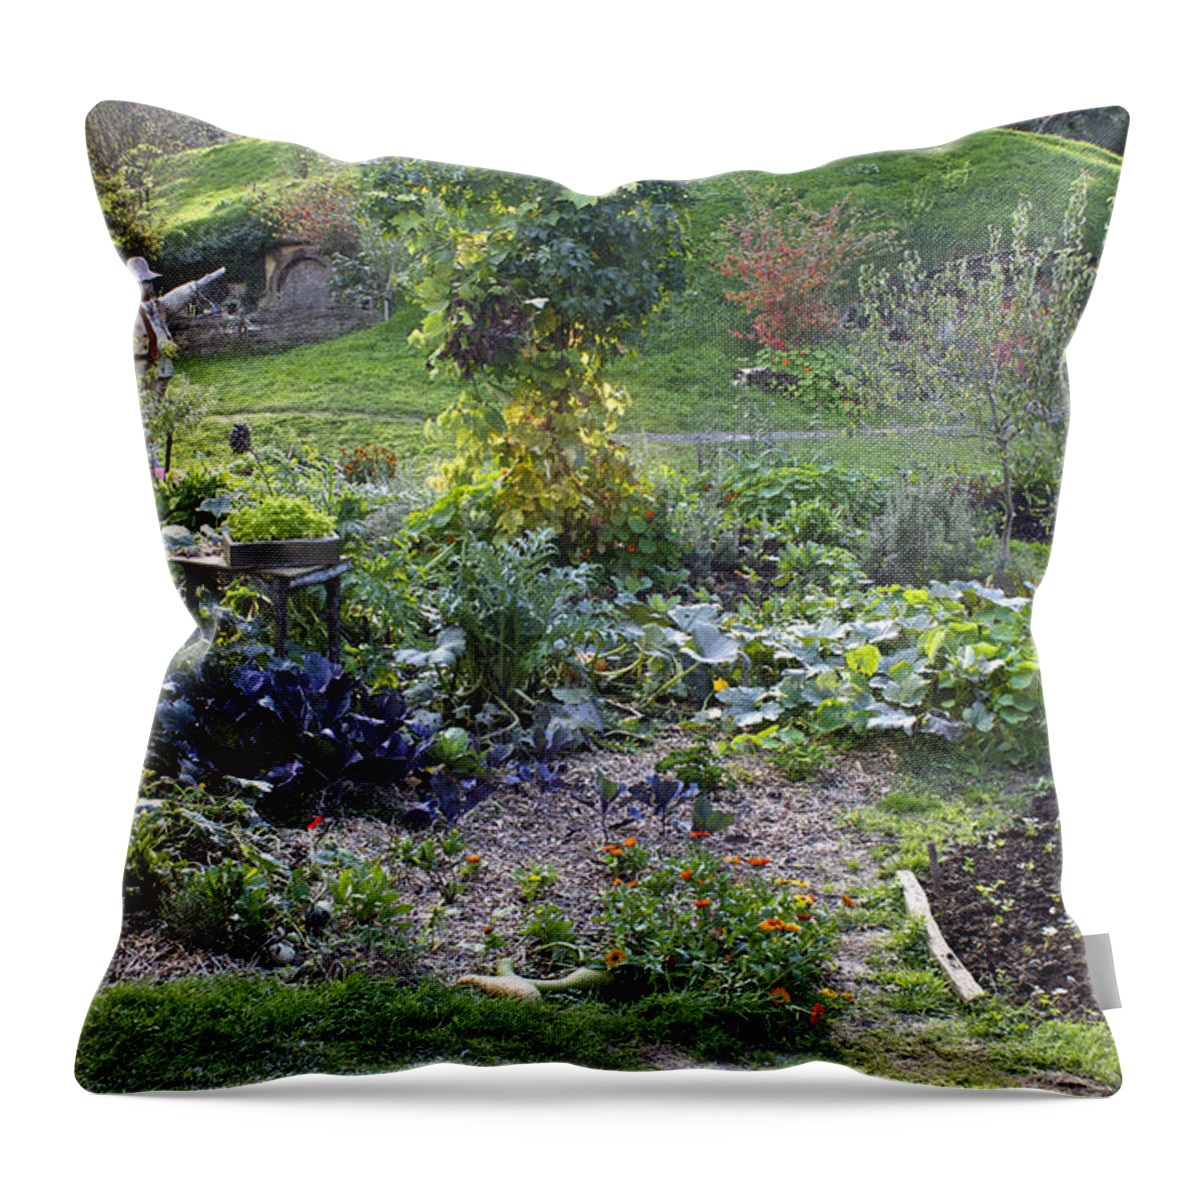 Hobbits Throw Pillow featuring the photograph Hobbit Garden in Bag End by Venetia Featherstone-Witty